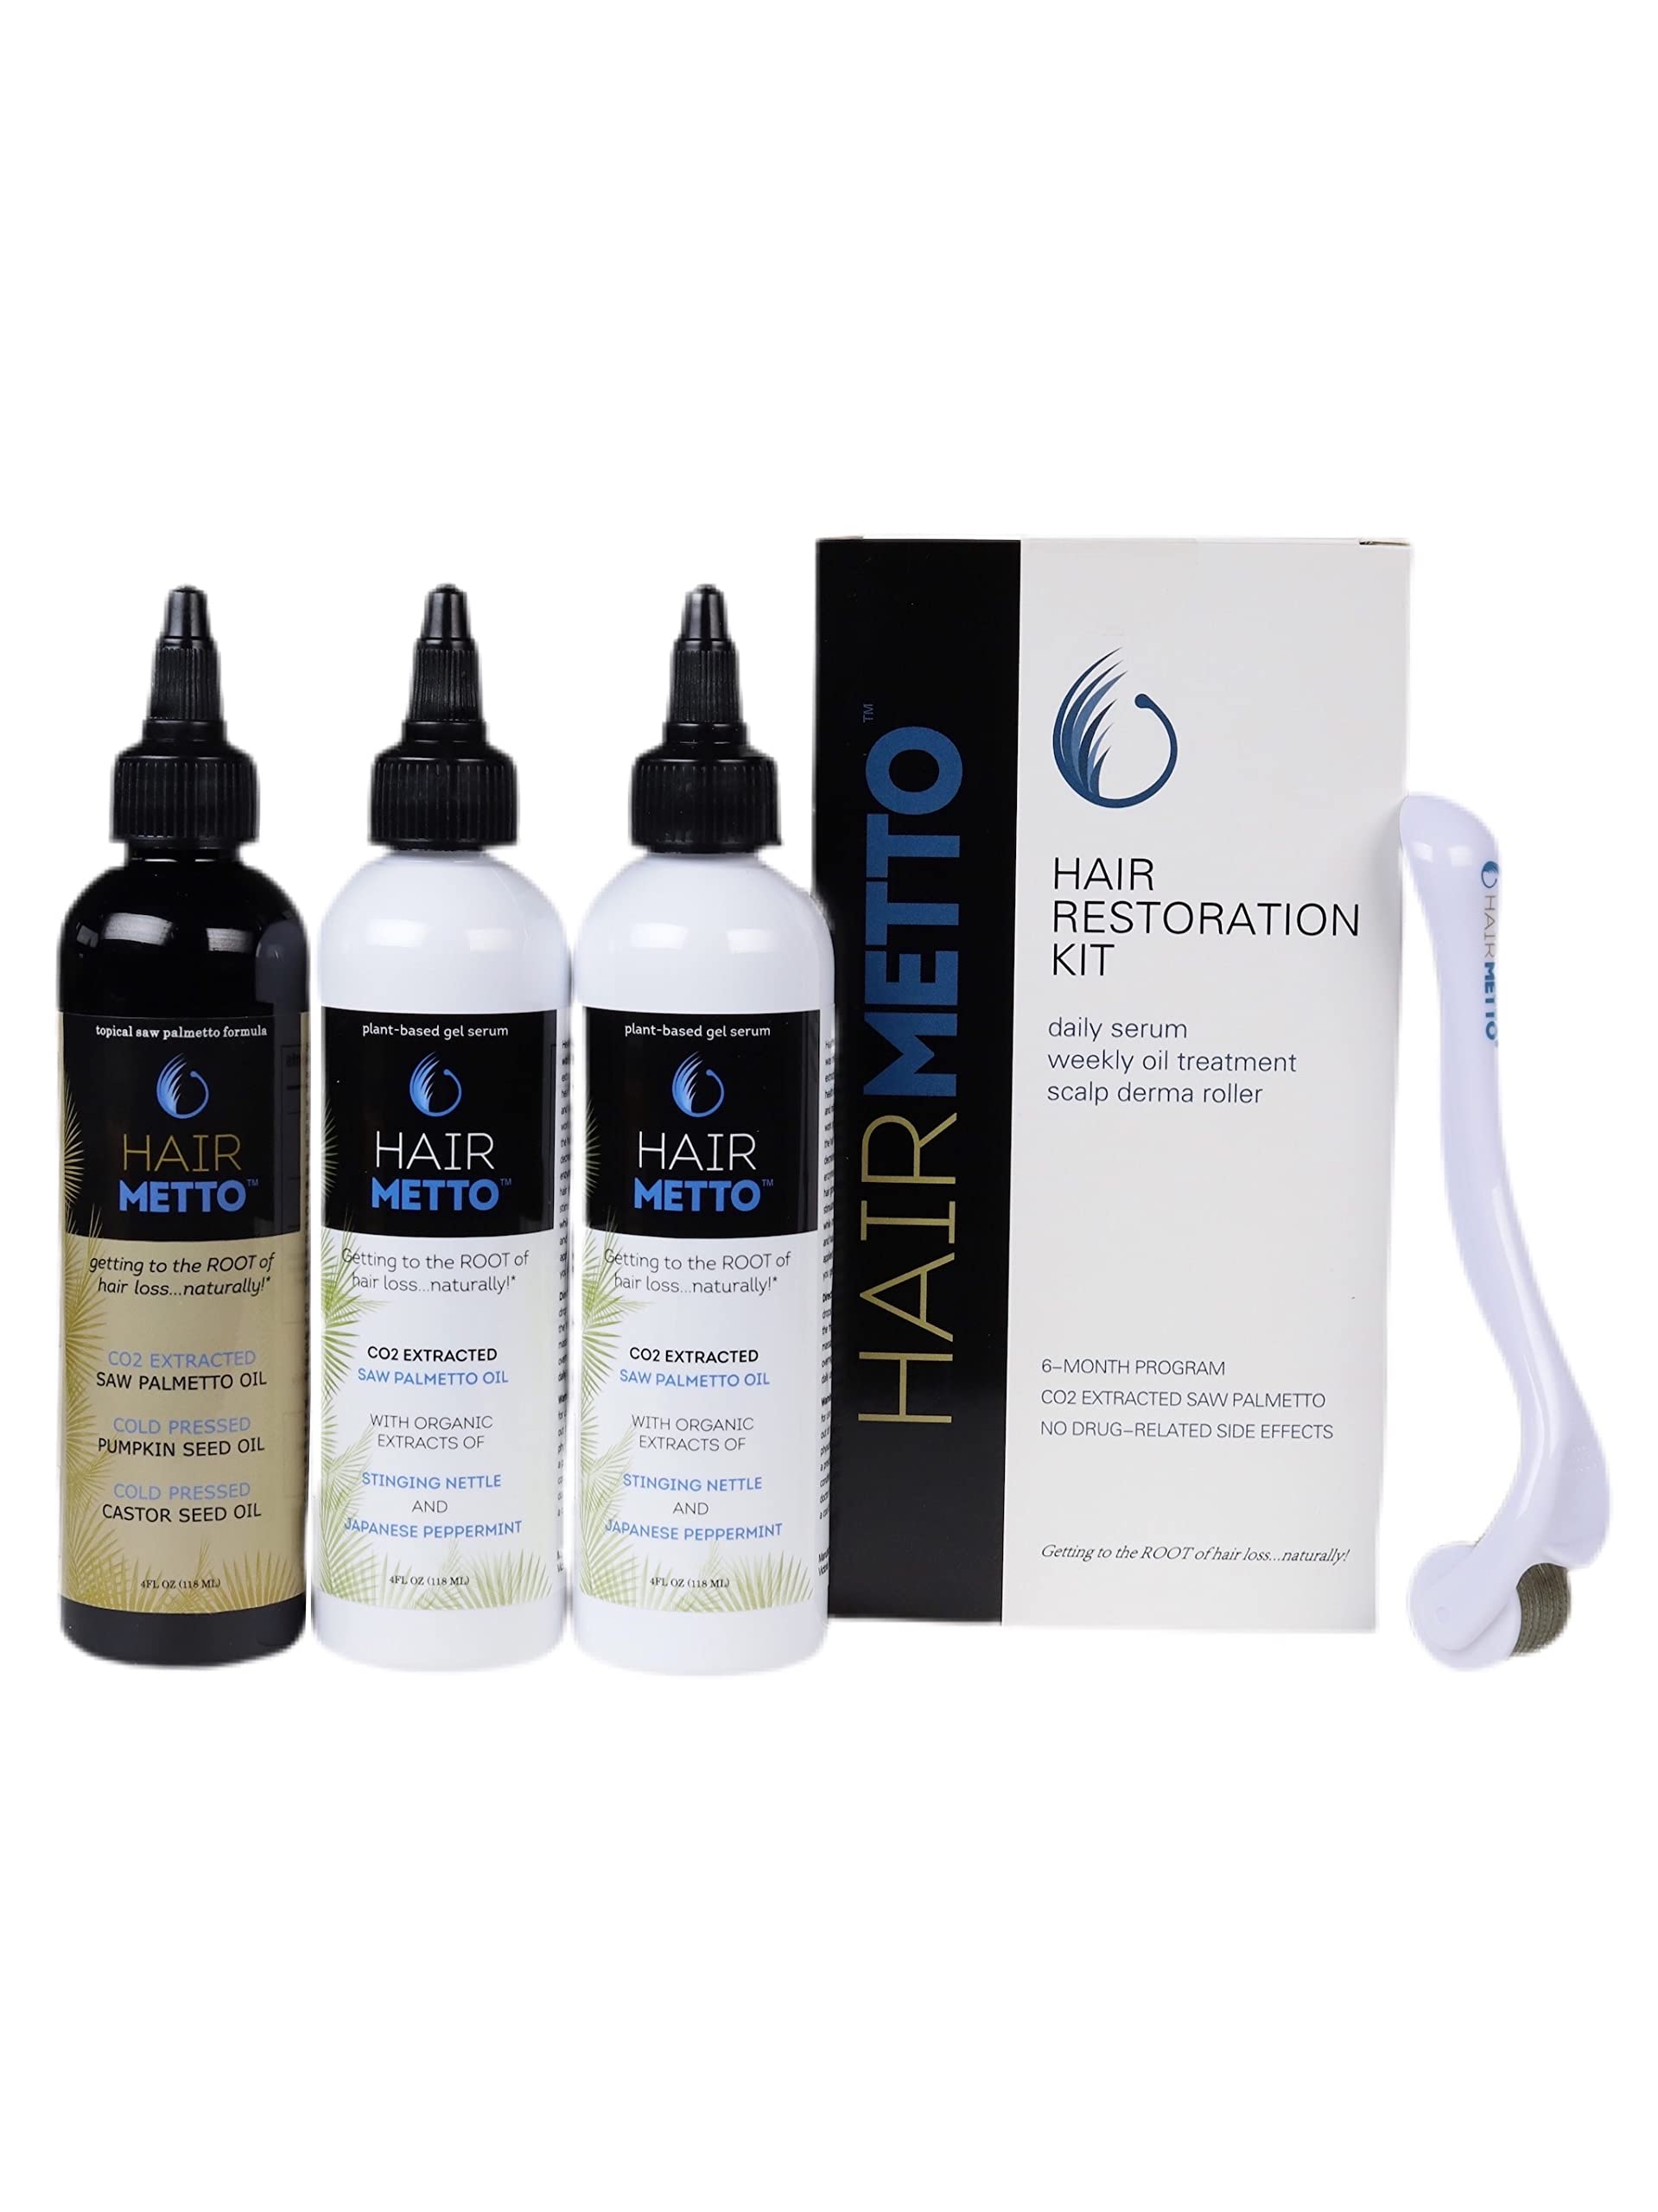 Mua HAIRMETTO Hair Restoration Kit for Hair Loss and Regrowth | Saw  Palmetto, Pumpkin Seed Oil | Stinging Nettle Serum | Scalp Derma Roller |  For Men and Women trên Amazon Mỹ chính hãng 2023 | Giaonhan247